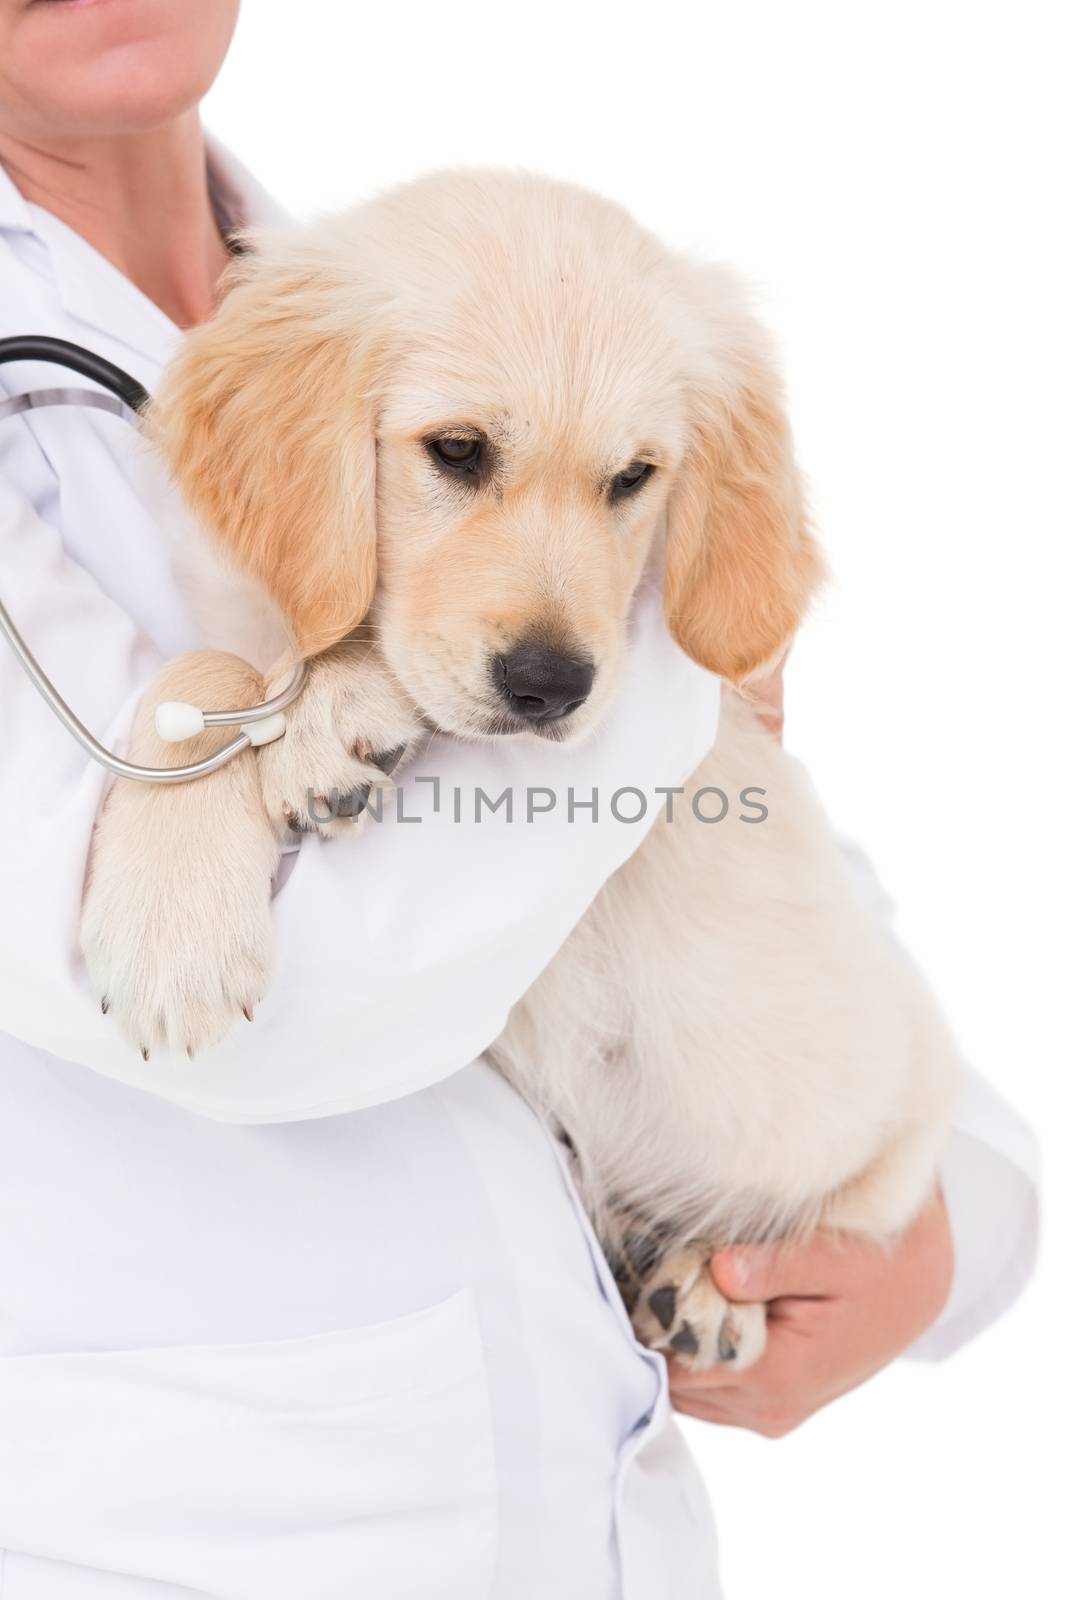 Veterinarian with a cute dog in her arms by Wavebreakmedia